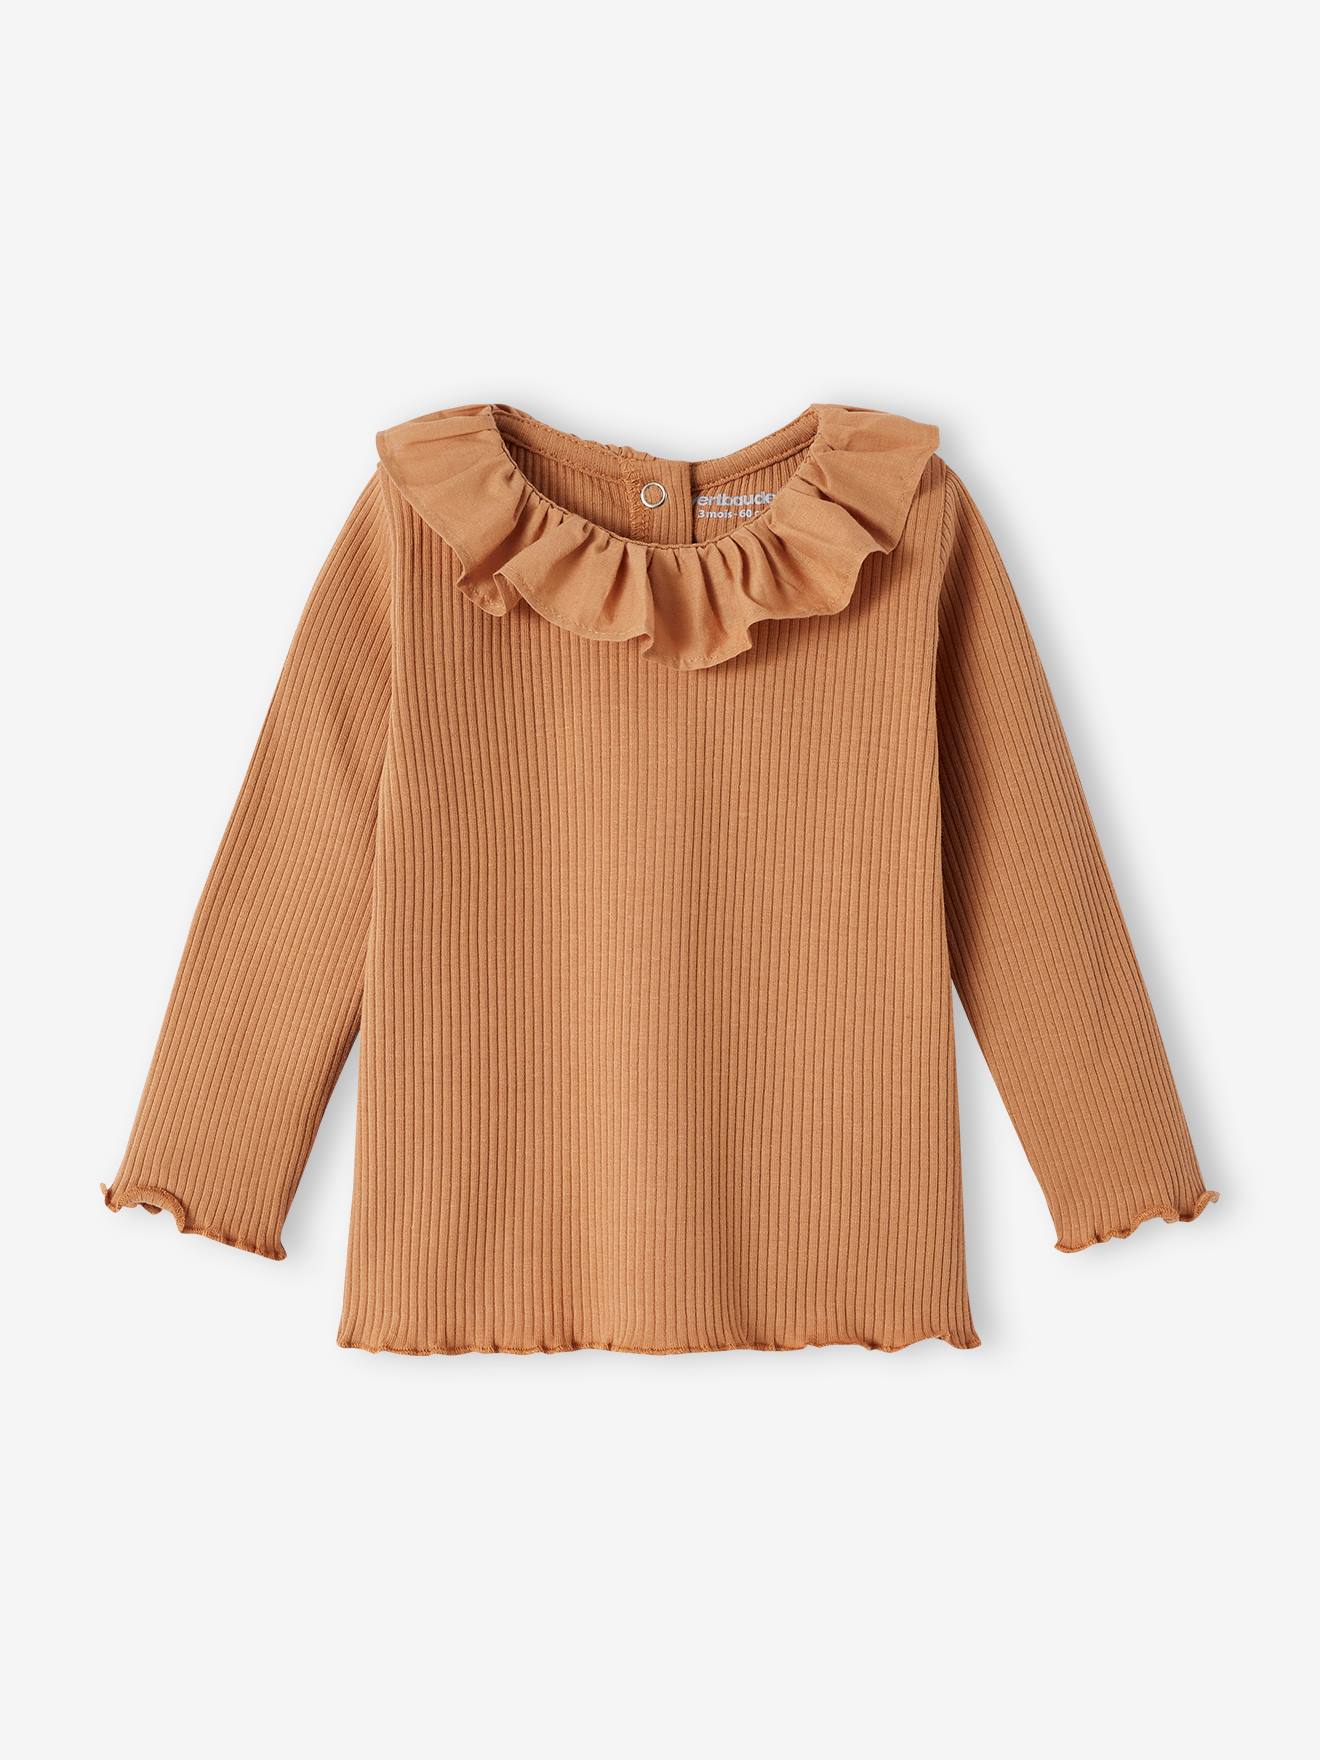 Wide Neck Rib Knit Top for Babies caramel